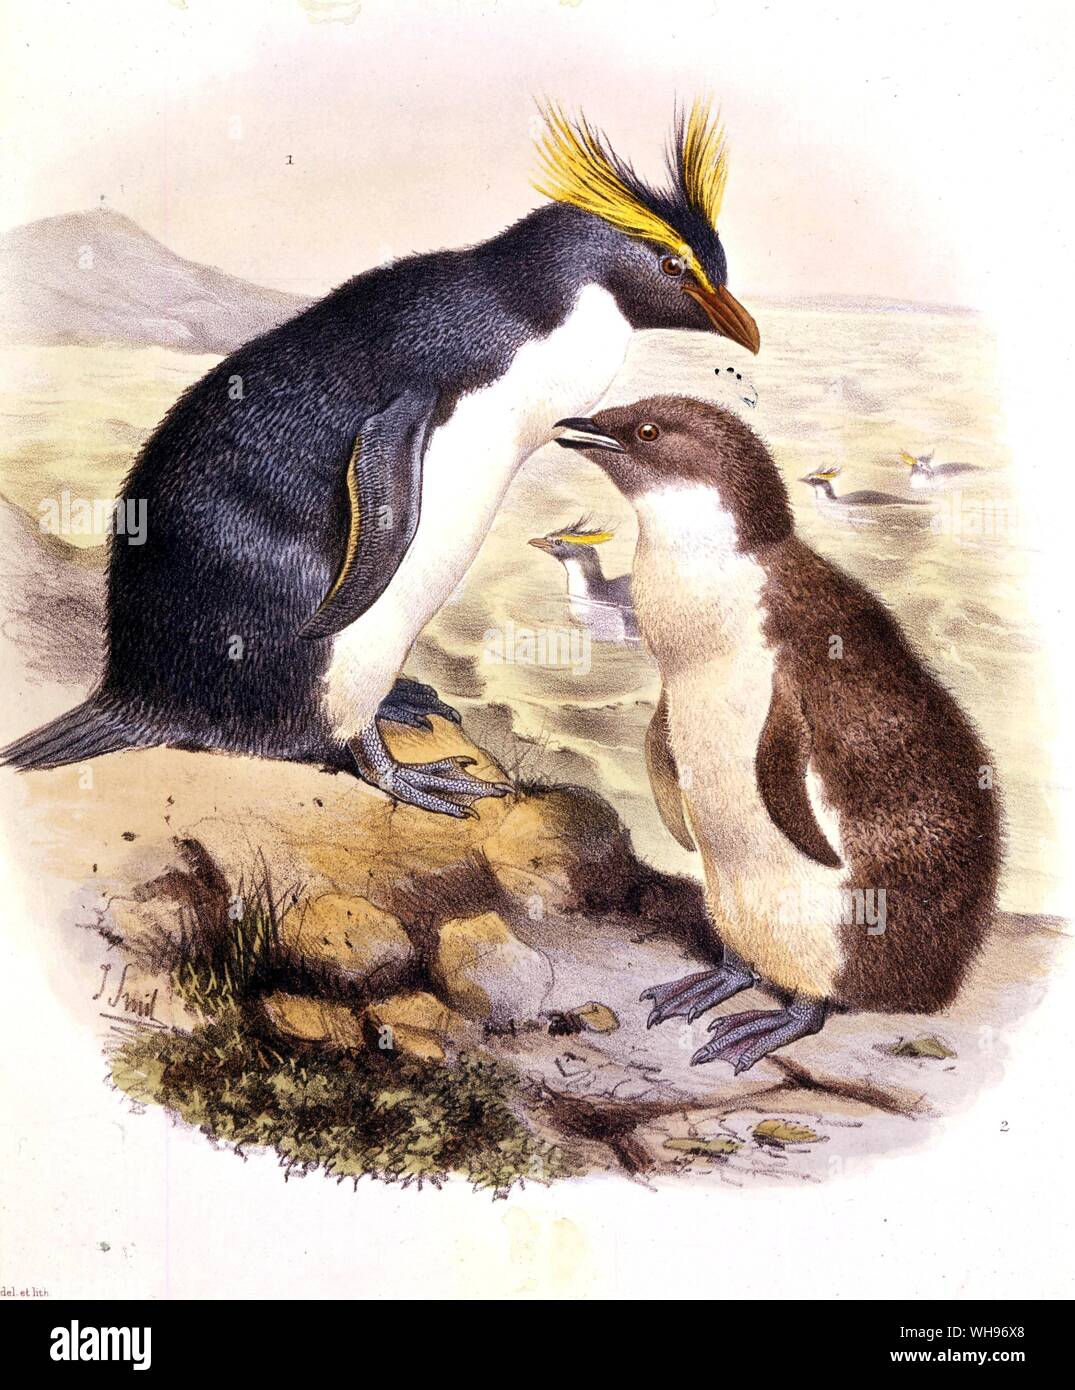 The penguin, Eudyptes chrysocome is seen with a youngster. Stock Photo